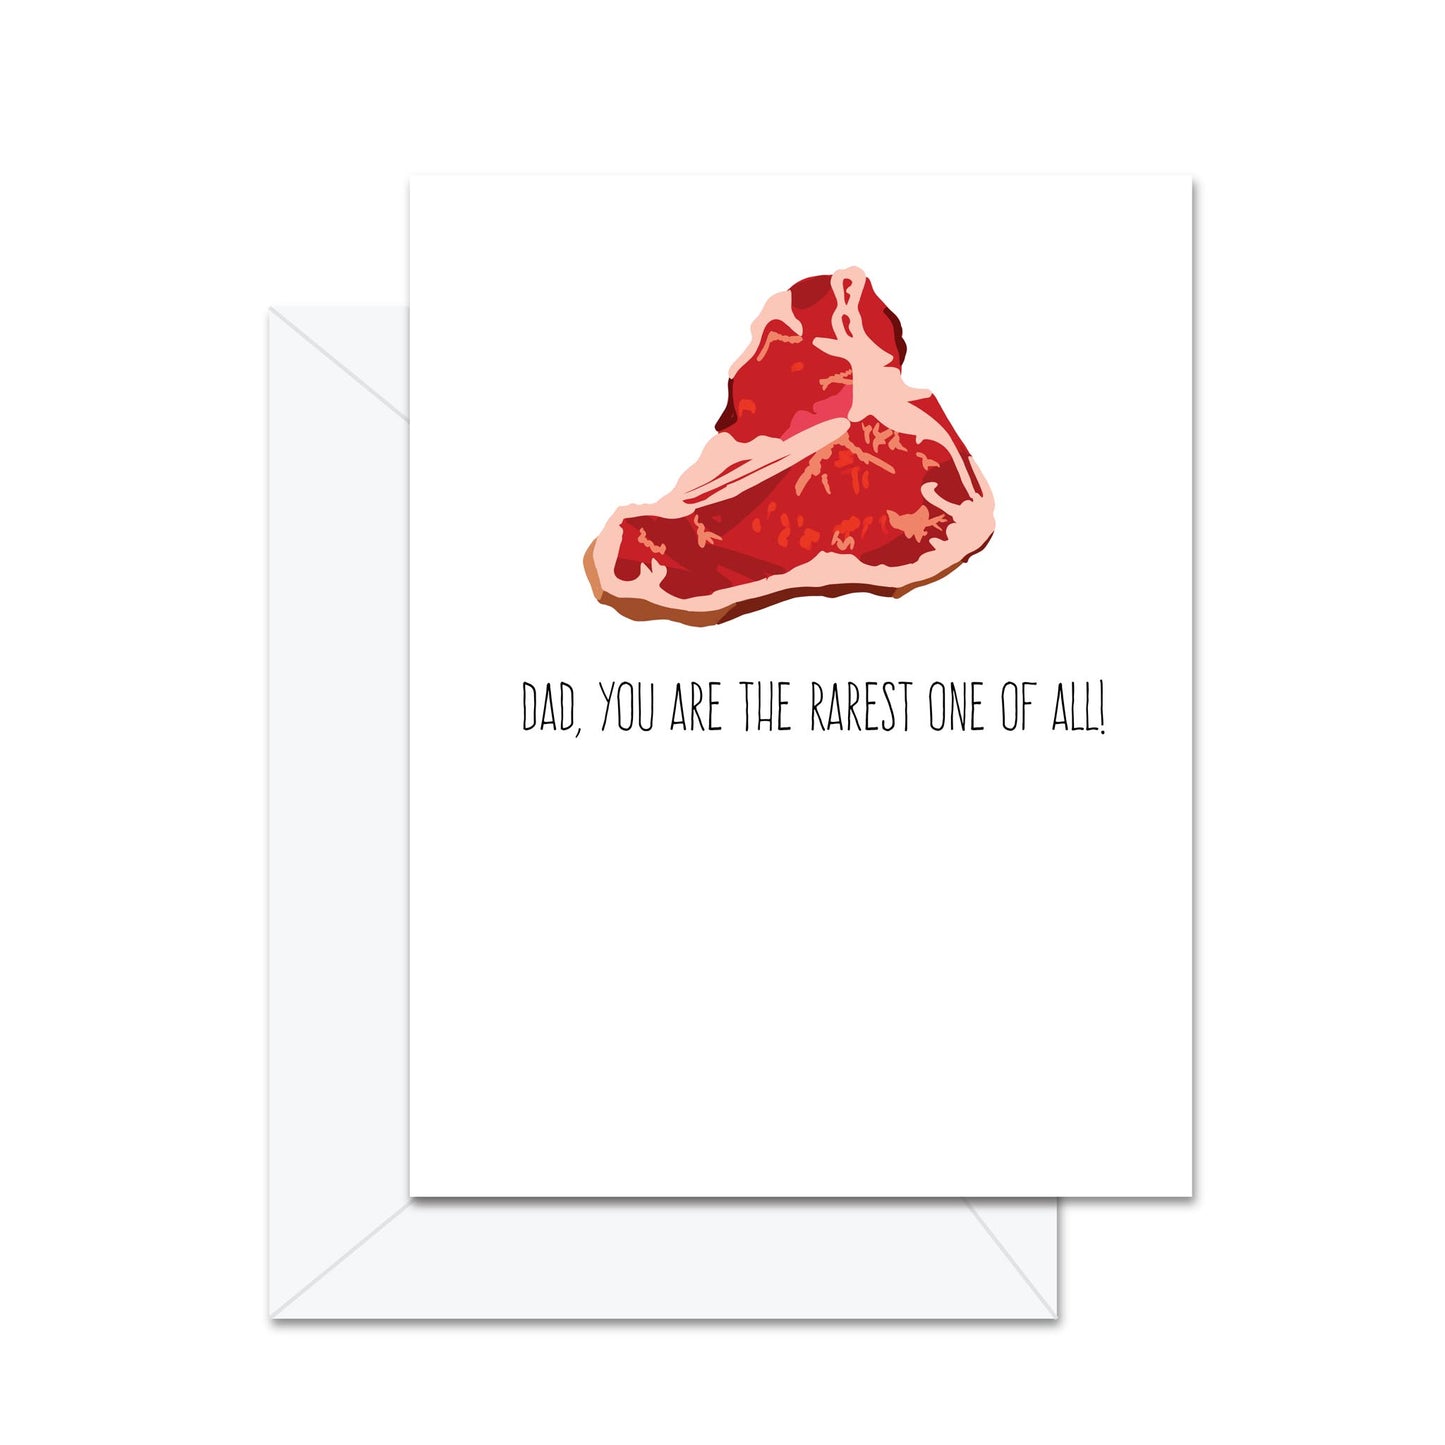 Dad, You Are The Rarest Of Them All! - Greeting Card